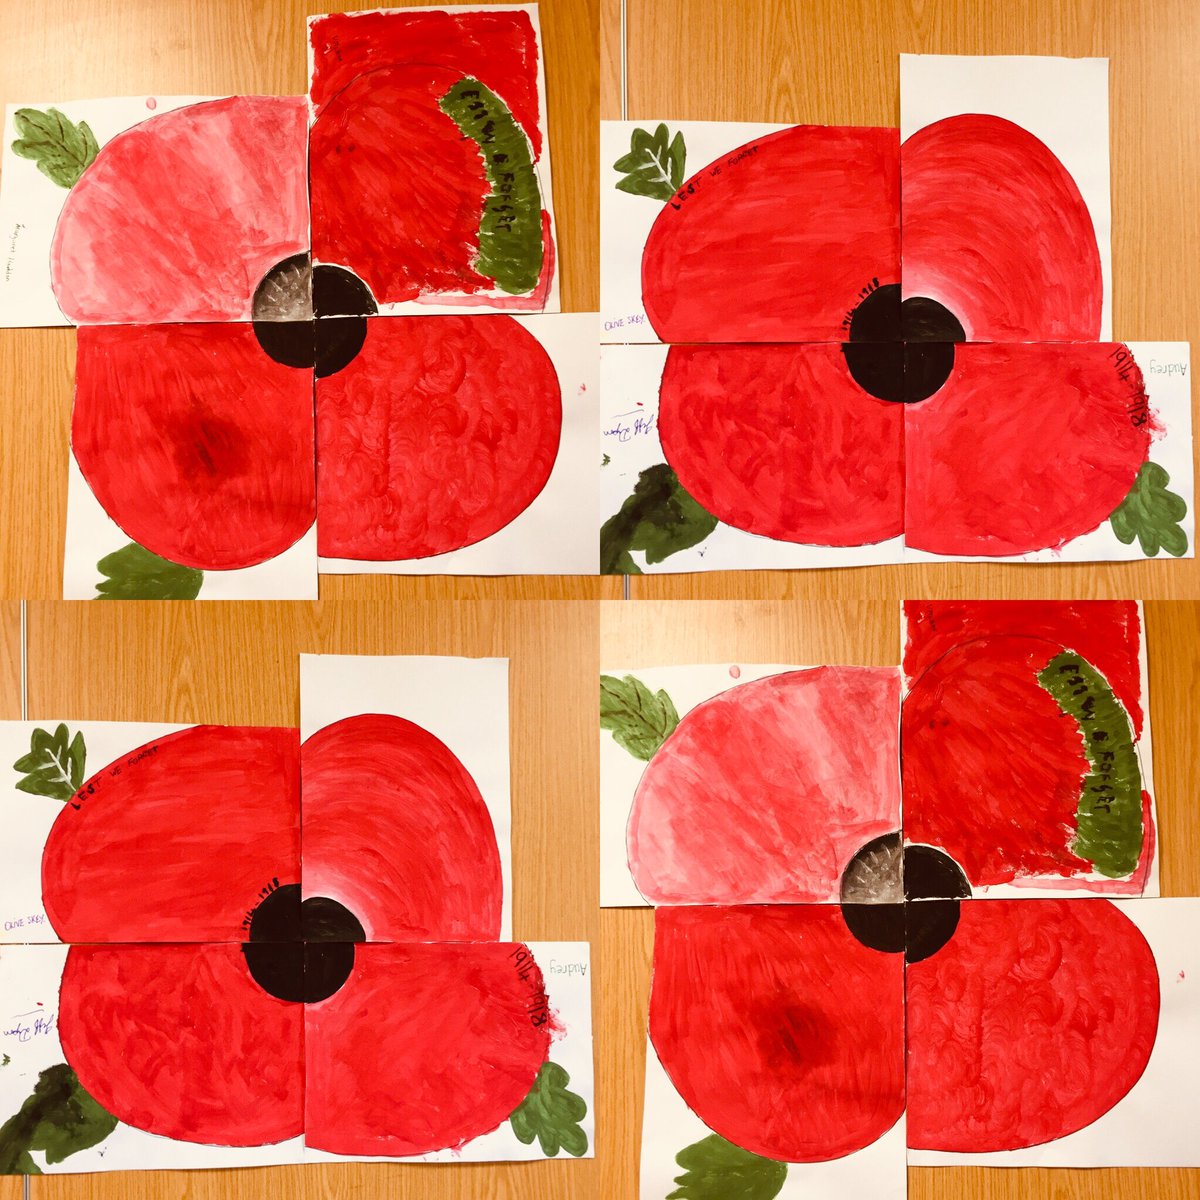 Lovely work by our art student volunteer and patients! (All photos taken with consent) #poppy #IamMCB #MakingCareBetter #RhydlafarUnit #CV_UHB